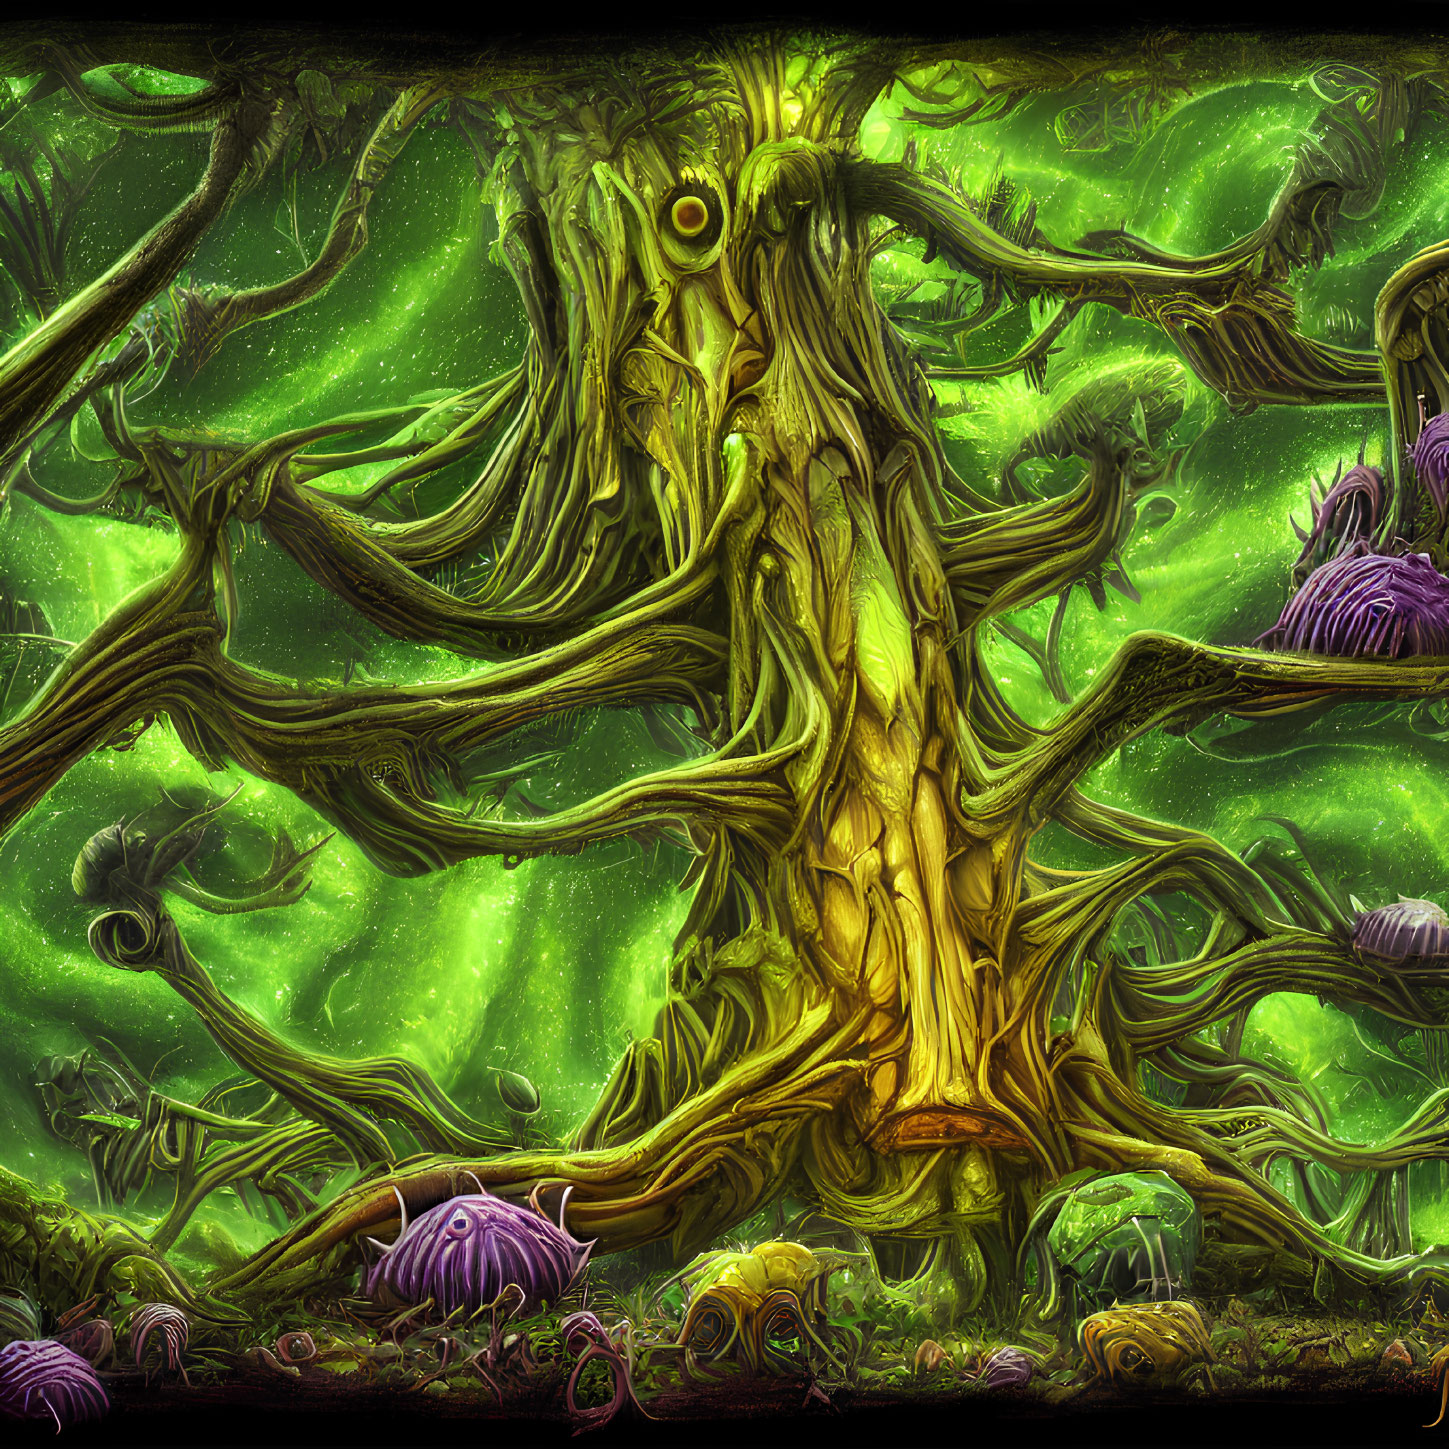 Luminous fantasy forest with massive gnarled tree & glowing plants